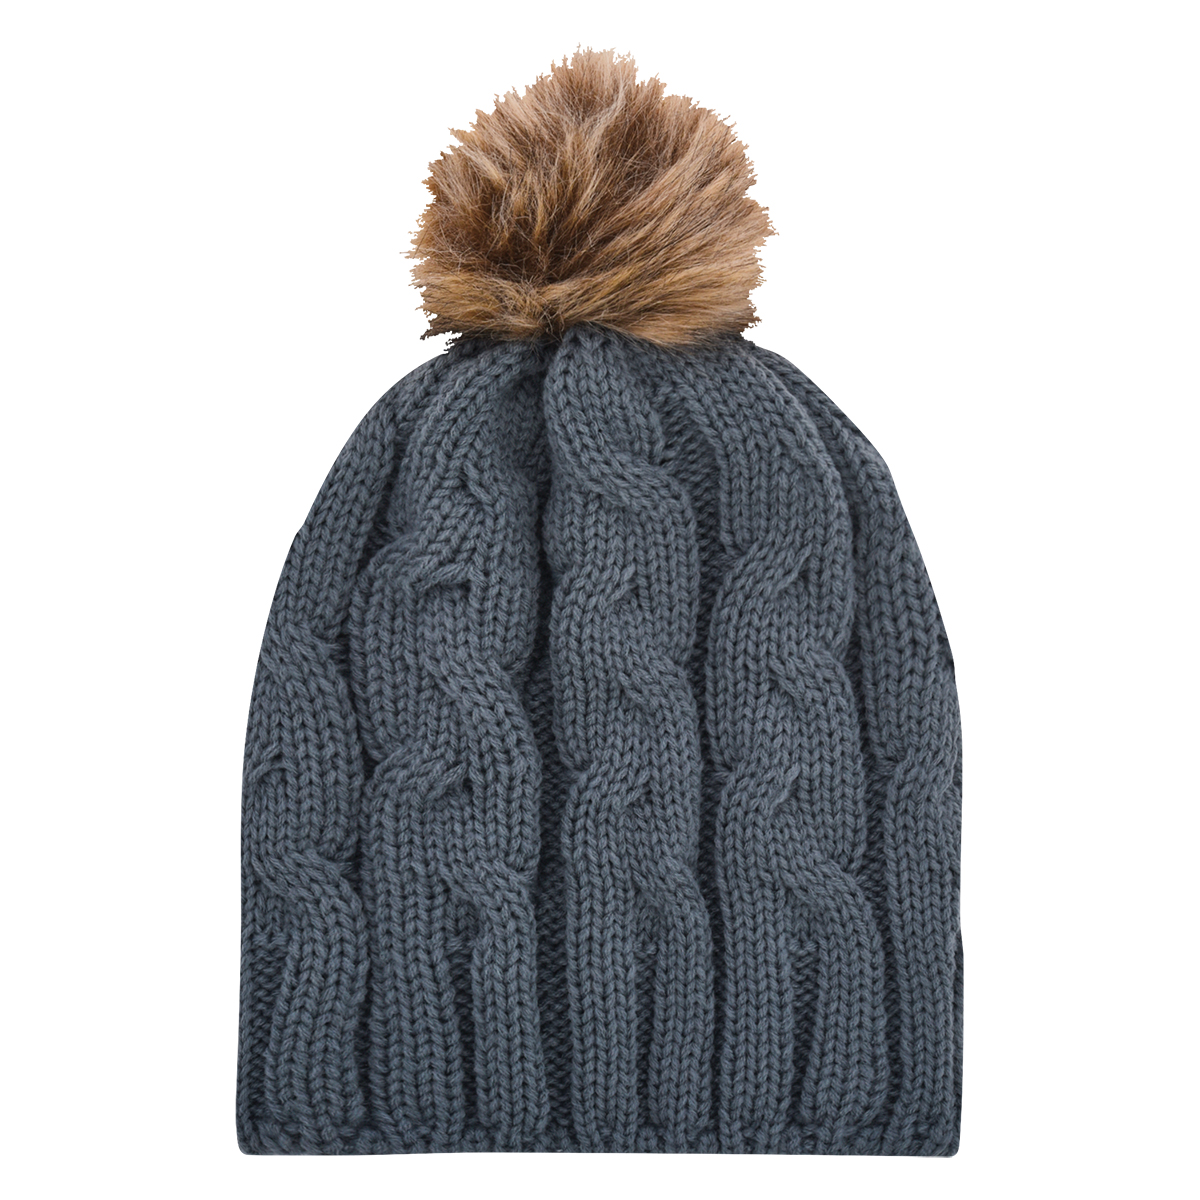 #1106 Cameron Cable Knit Pom Beanie - Hit Promotional Products